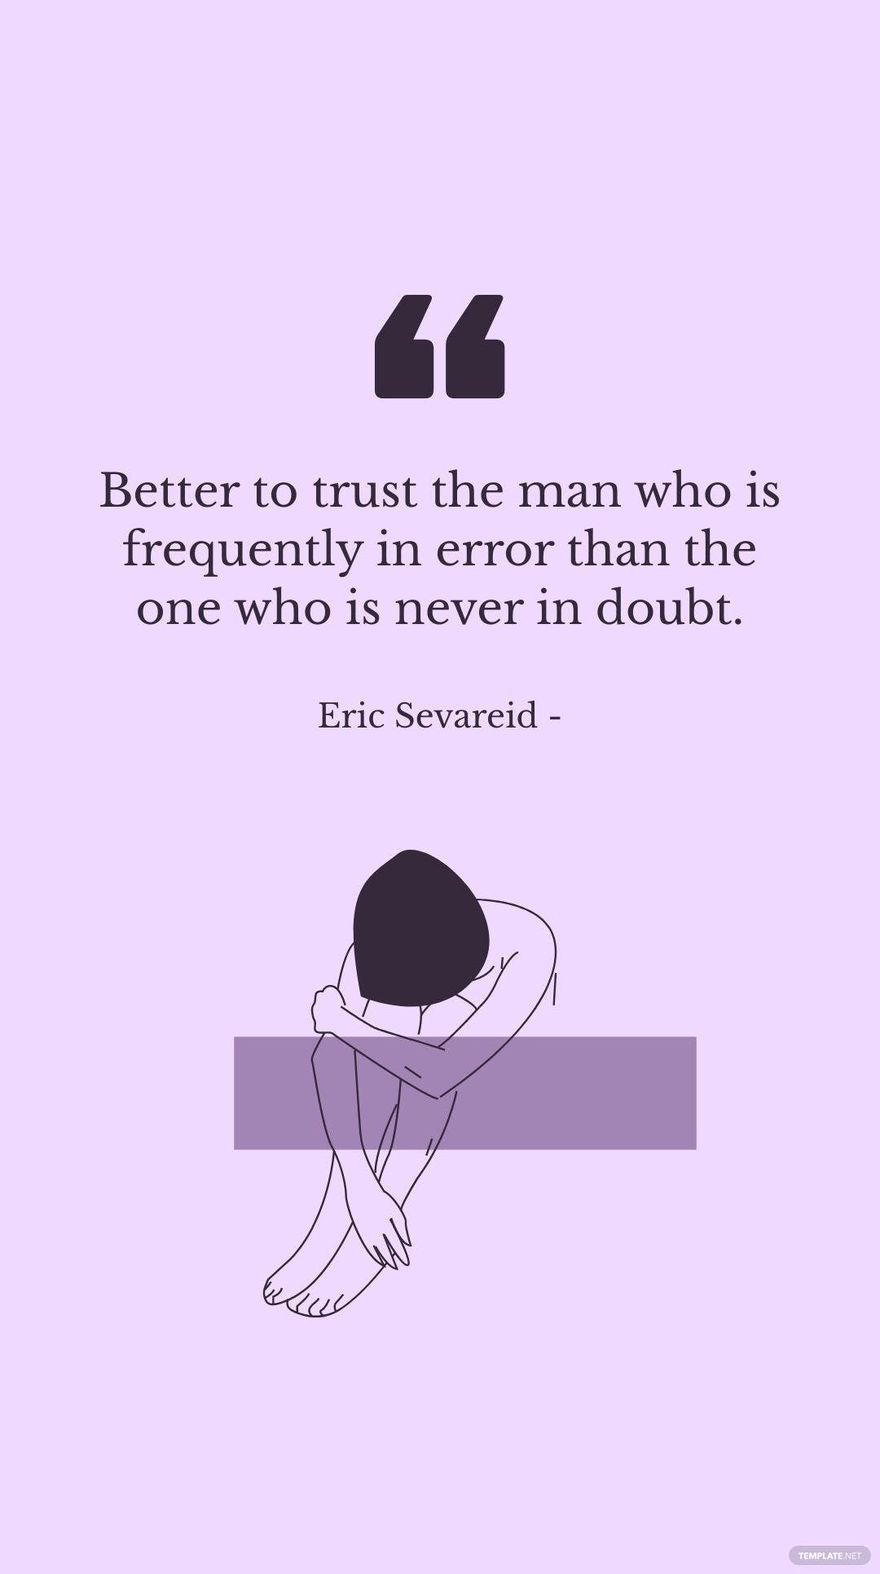 Eric Sevareid - Better to trust the man who is frequently in error than the one who is never in doubt. in JPG